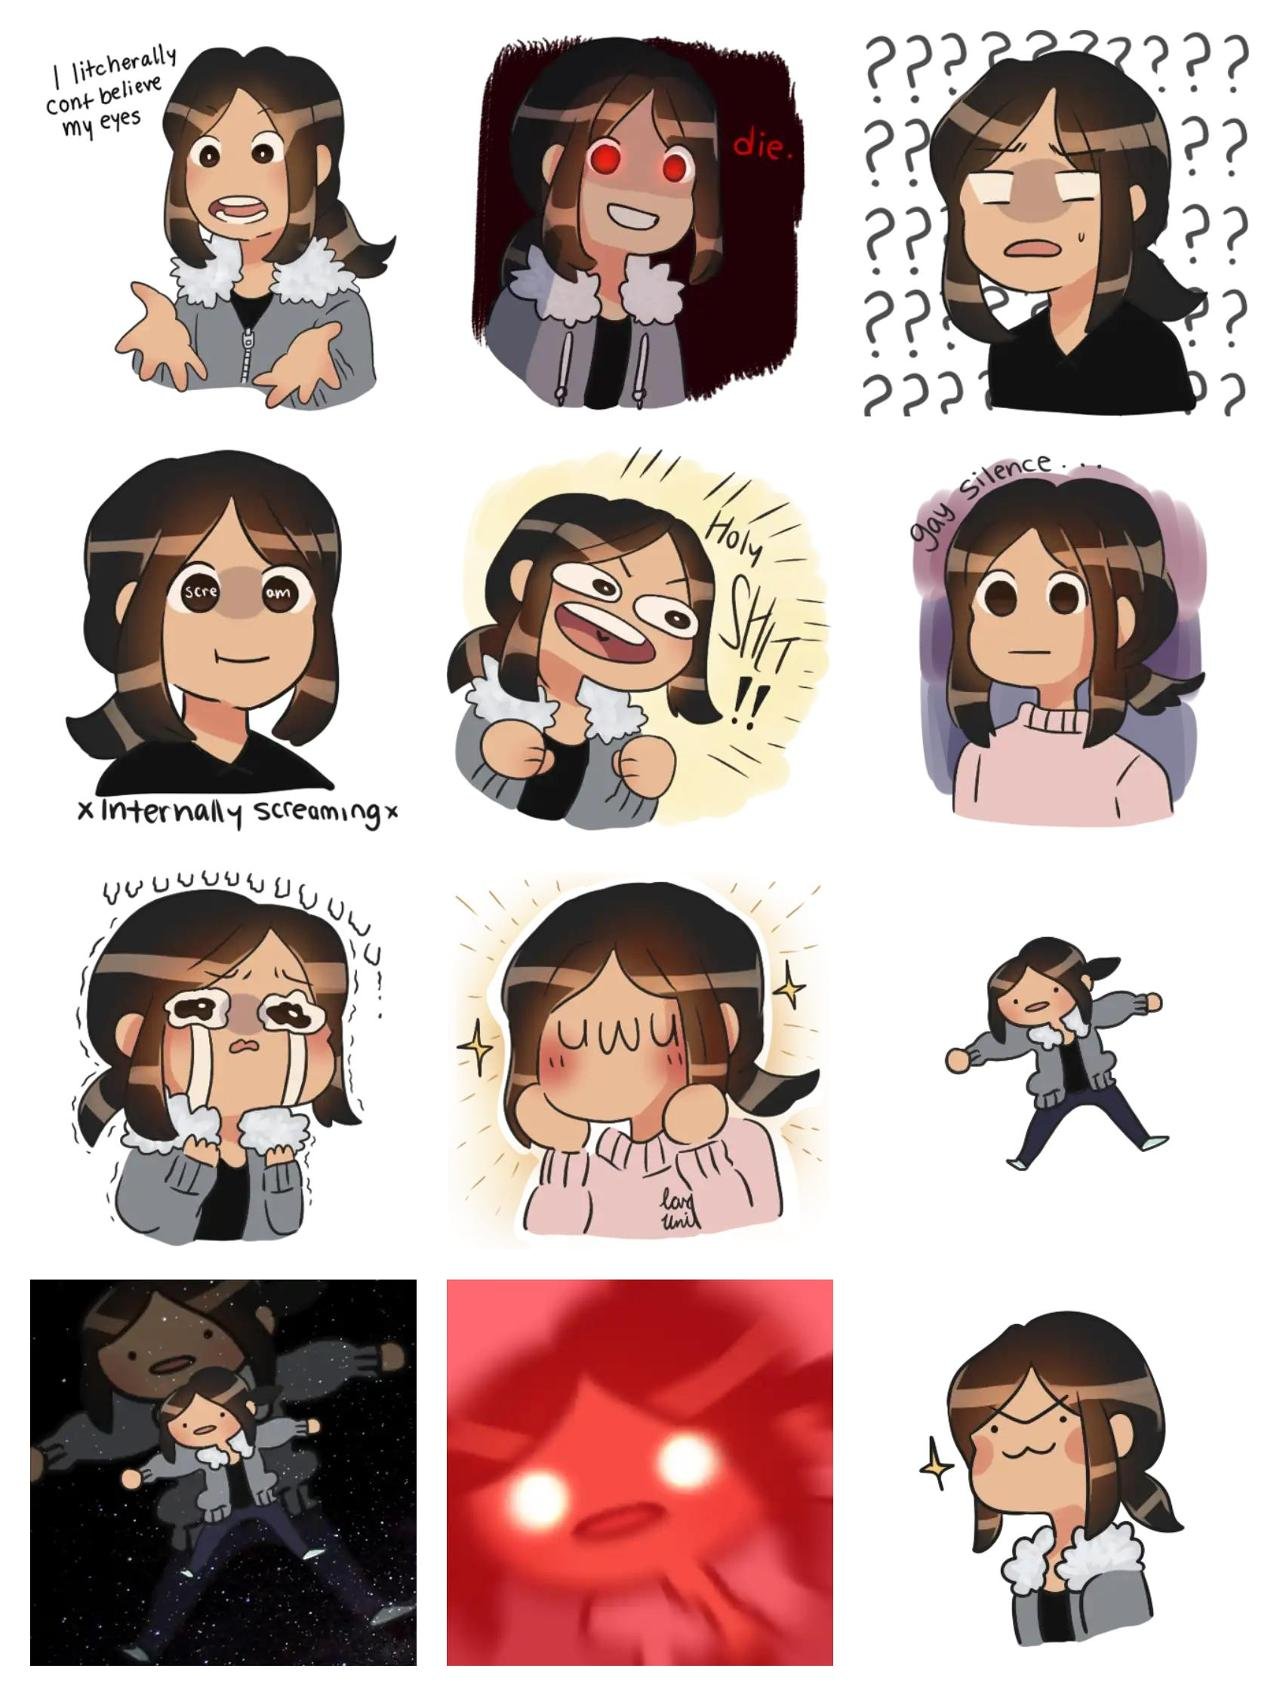 Me me Animation/Cartoon sticker pack for Whatsapp, Telegram, Signal, and others chatting and message apps